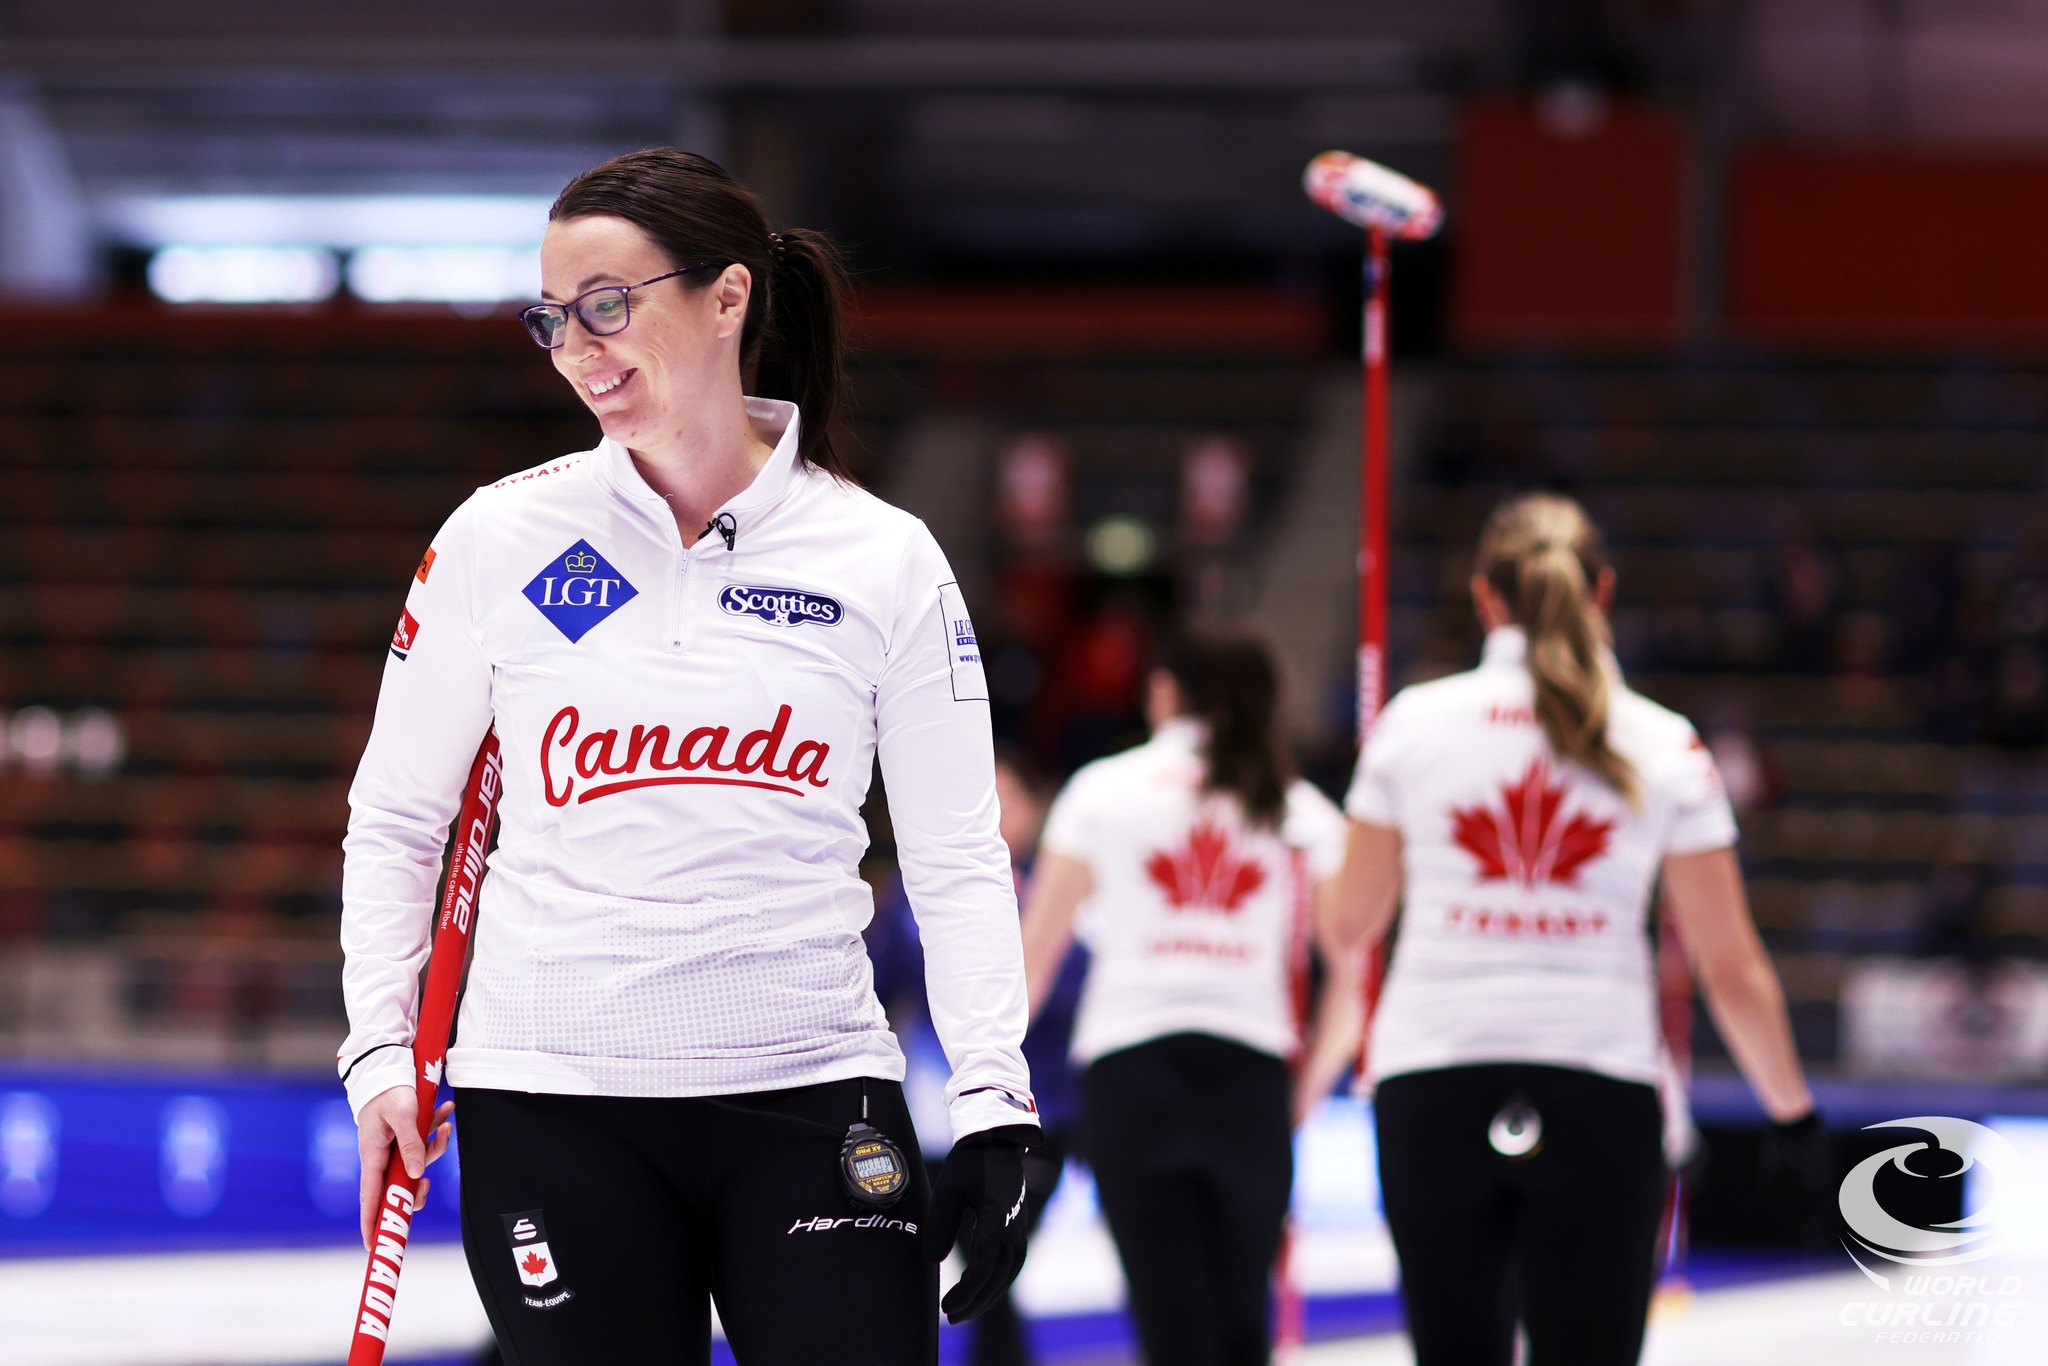 CANADA ENDS DAY 4 AT WOMEN'S WORLDS WITH A VICTORY